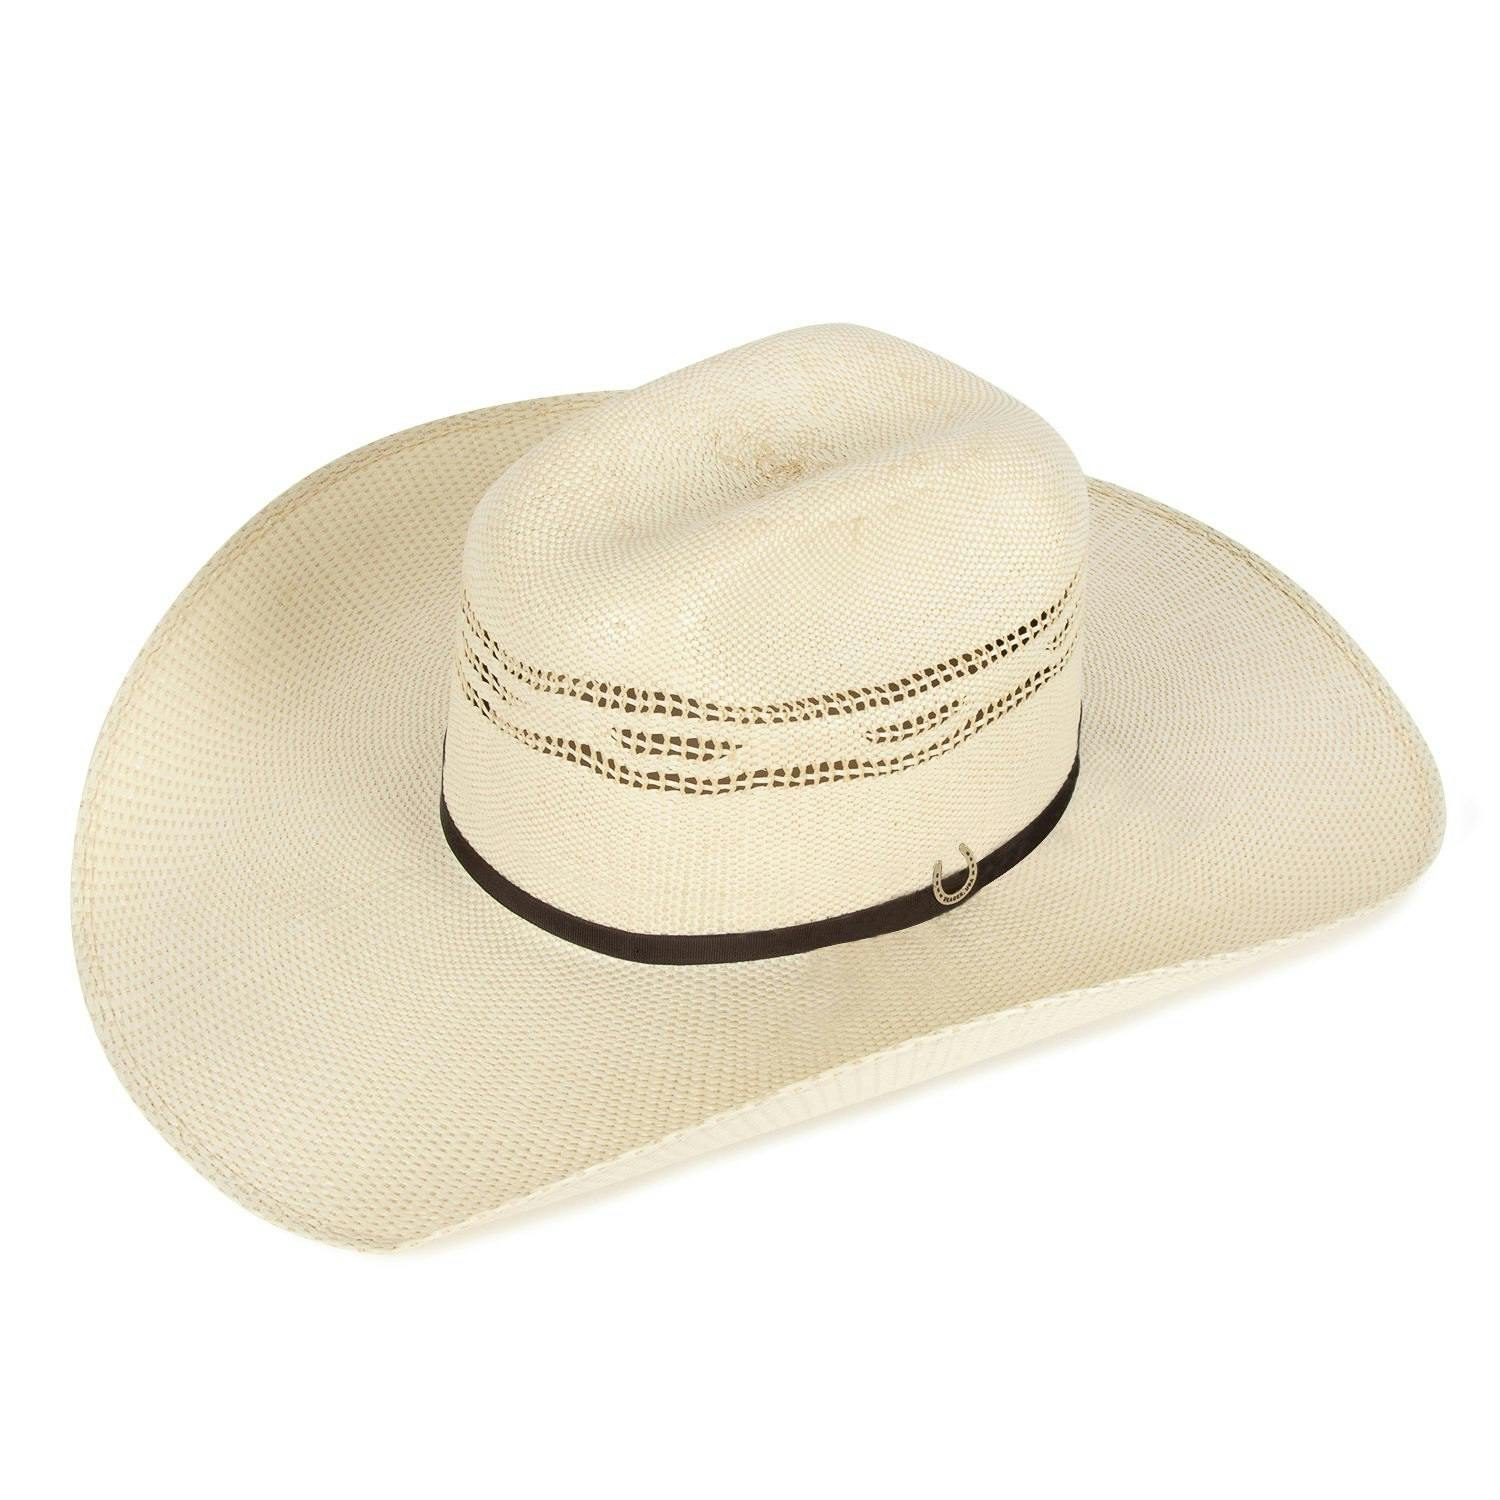 Seager Co. Longhorn Straw Hat - Straw, Gifts